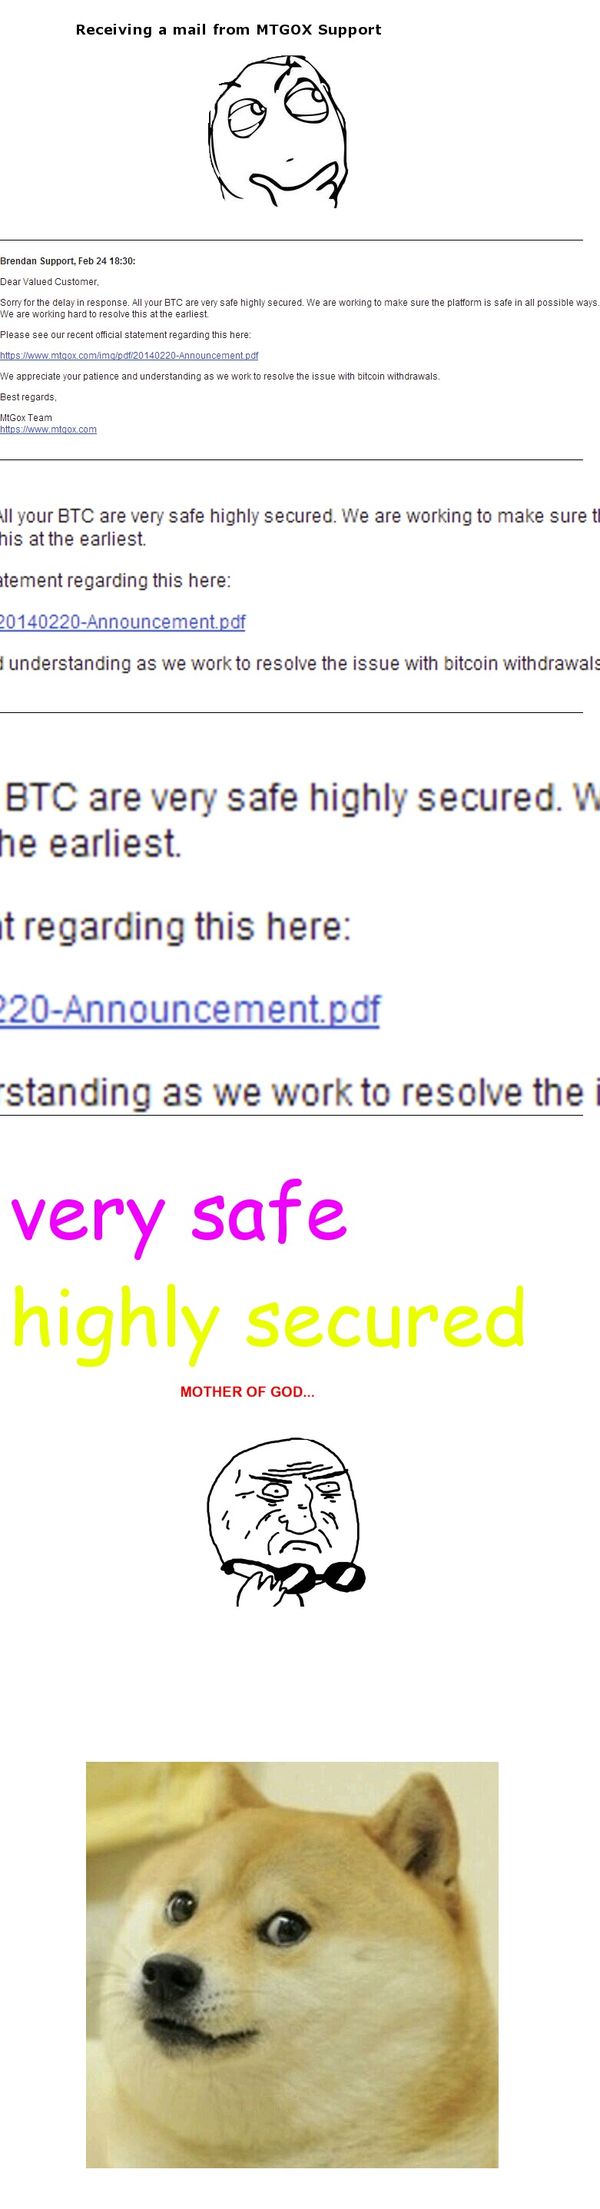 Receiving a mail from MTGOX Support BTC are very safe highly secured very safe highly secured MOTHER OF GOD...